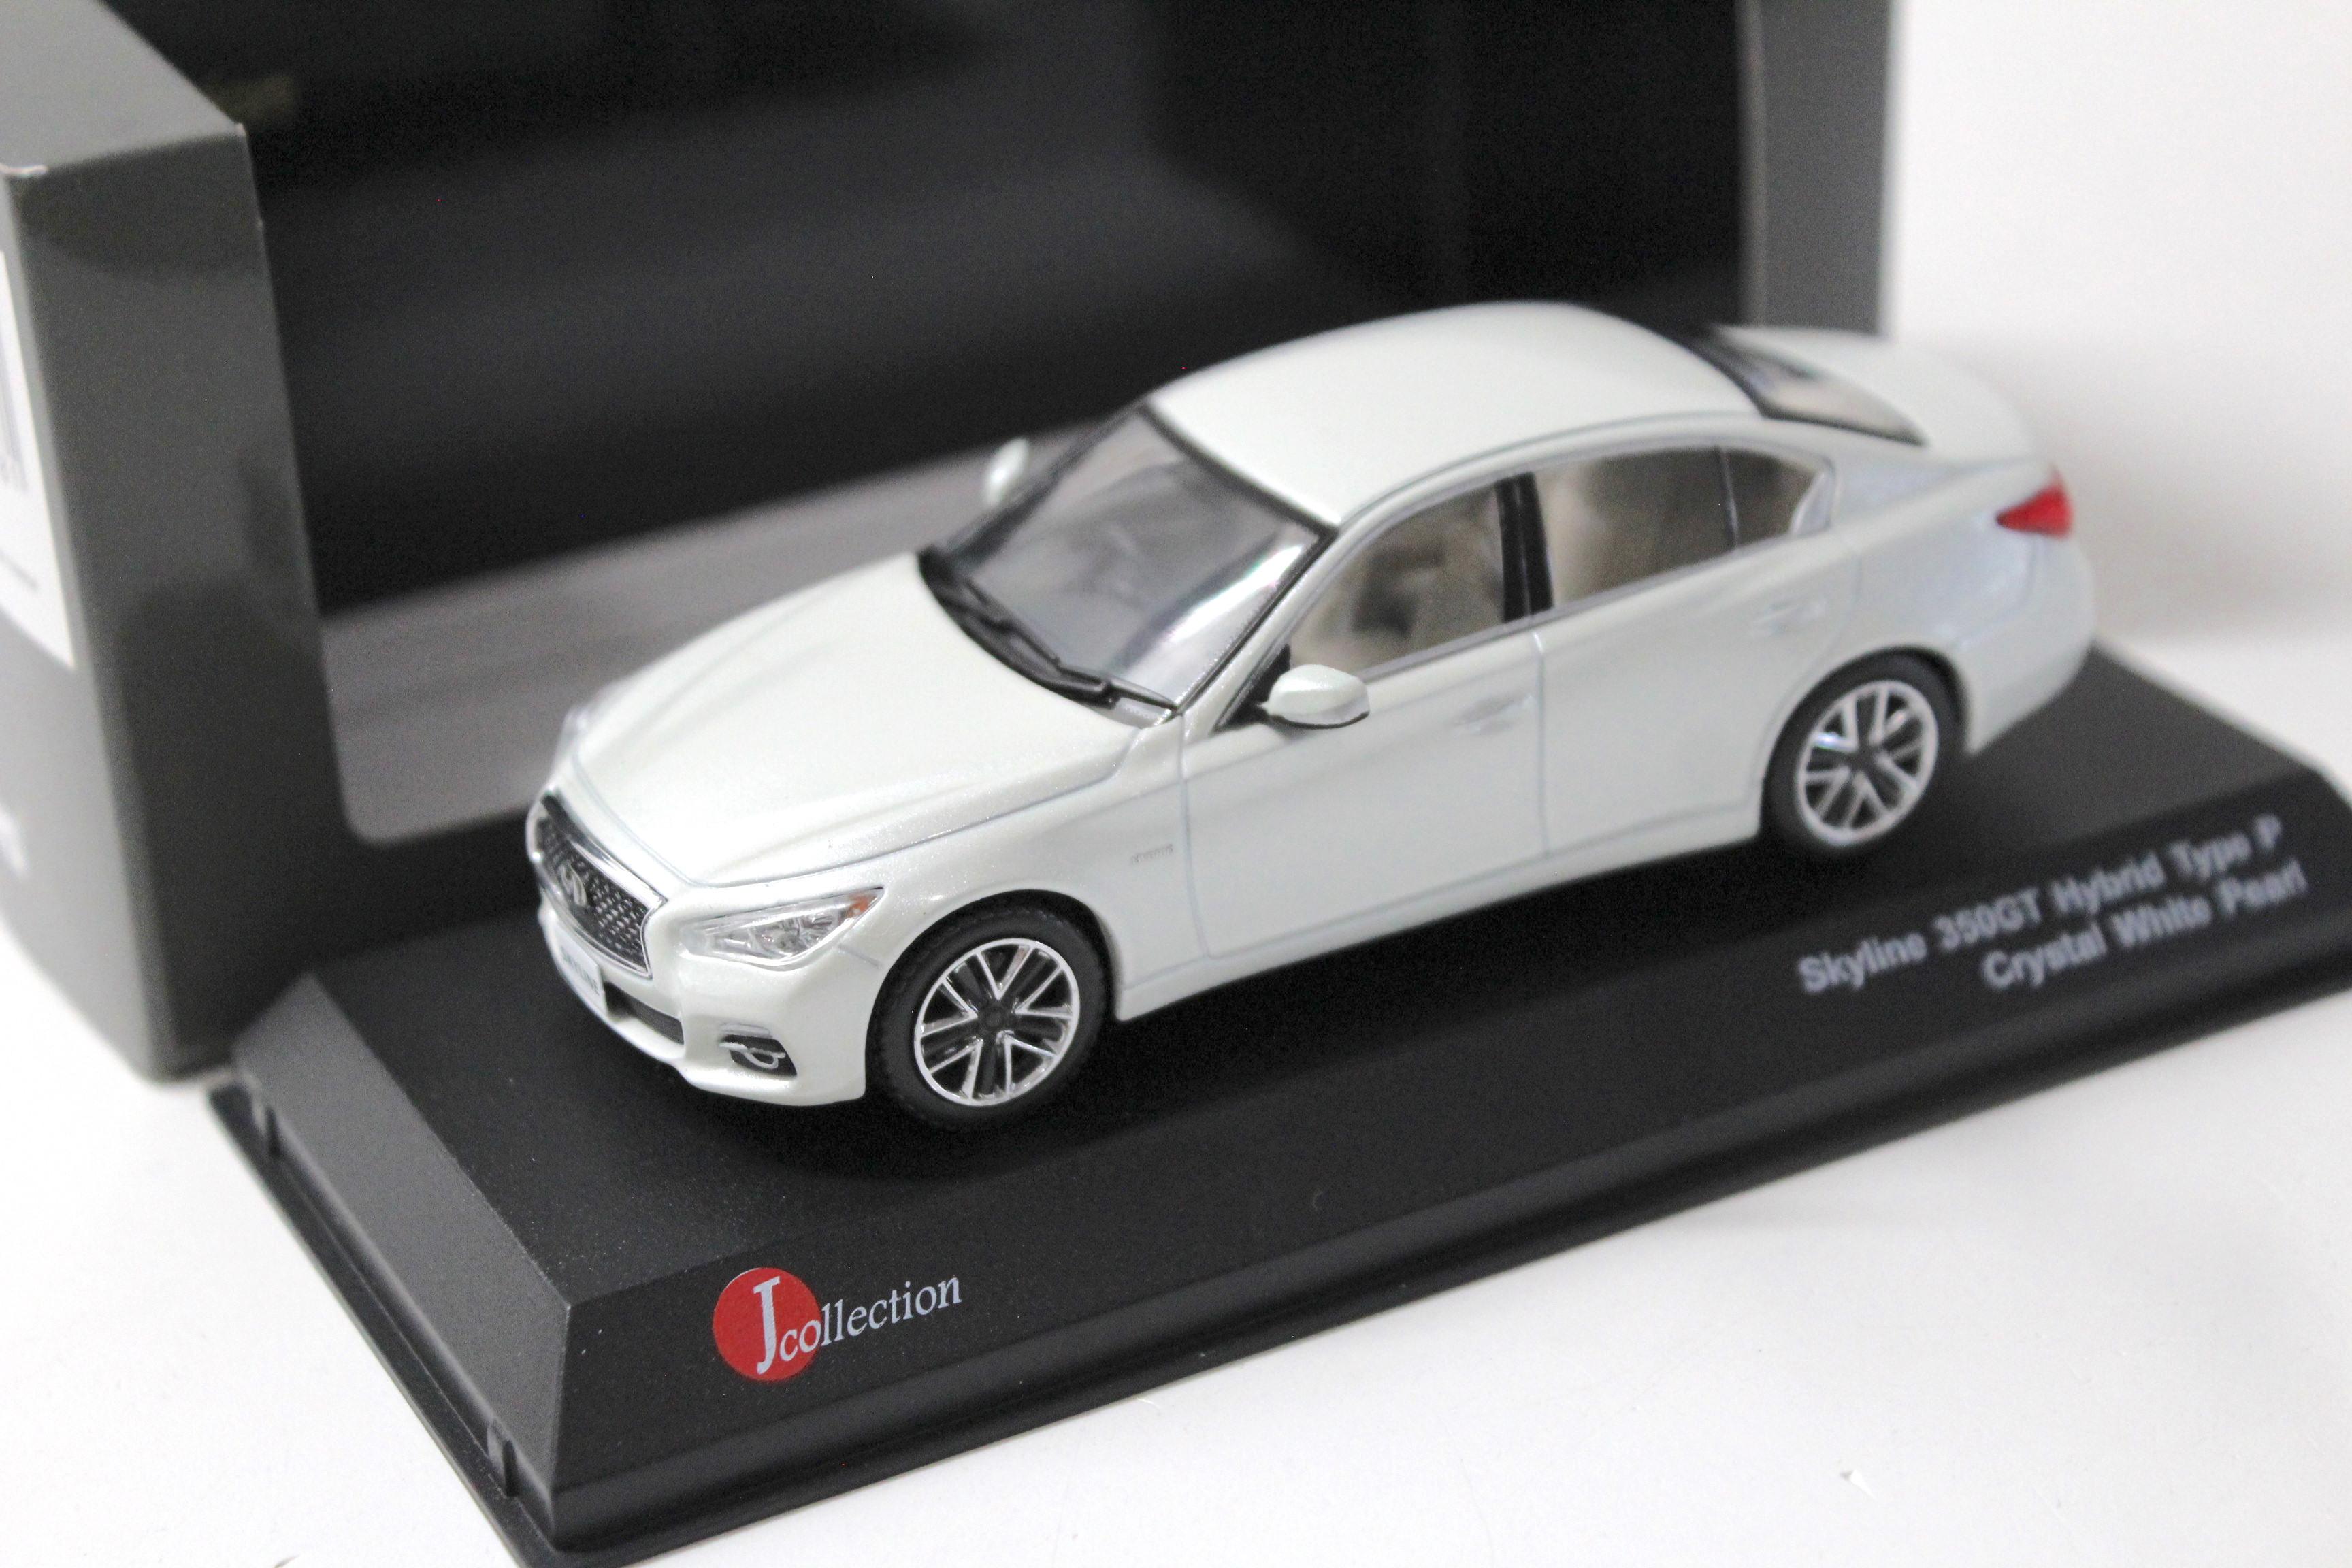 1:43 Kyosho J-Collection Nissan Skyline 350GT Hybrid Type P white pearl